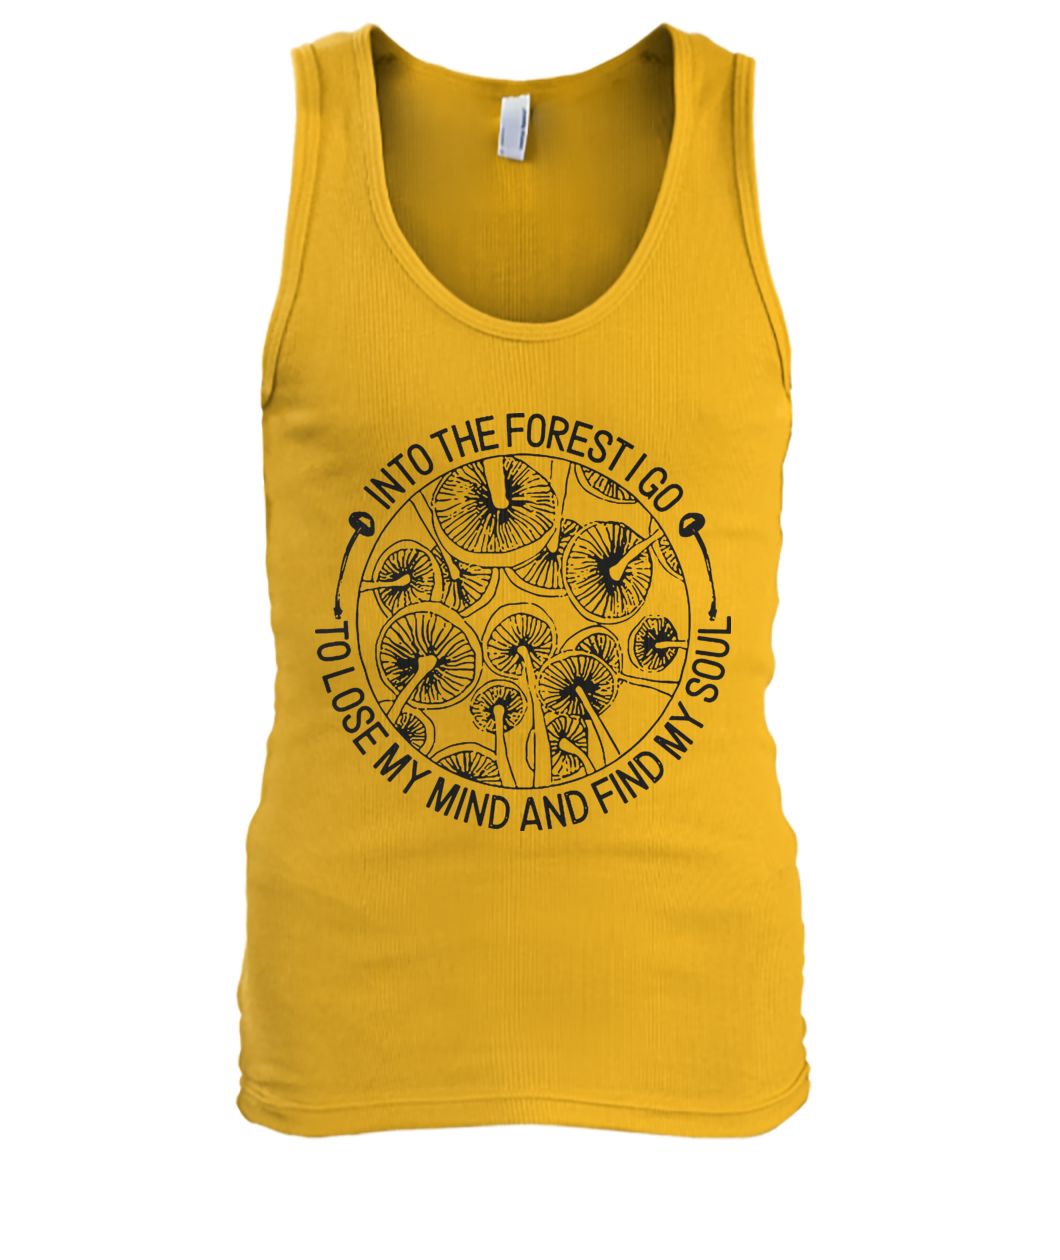 Mushroom into the forest I go to lose my mind and find my soul men's tank top